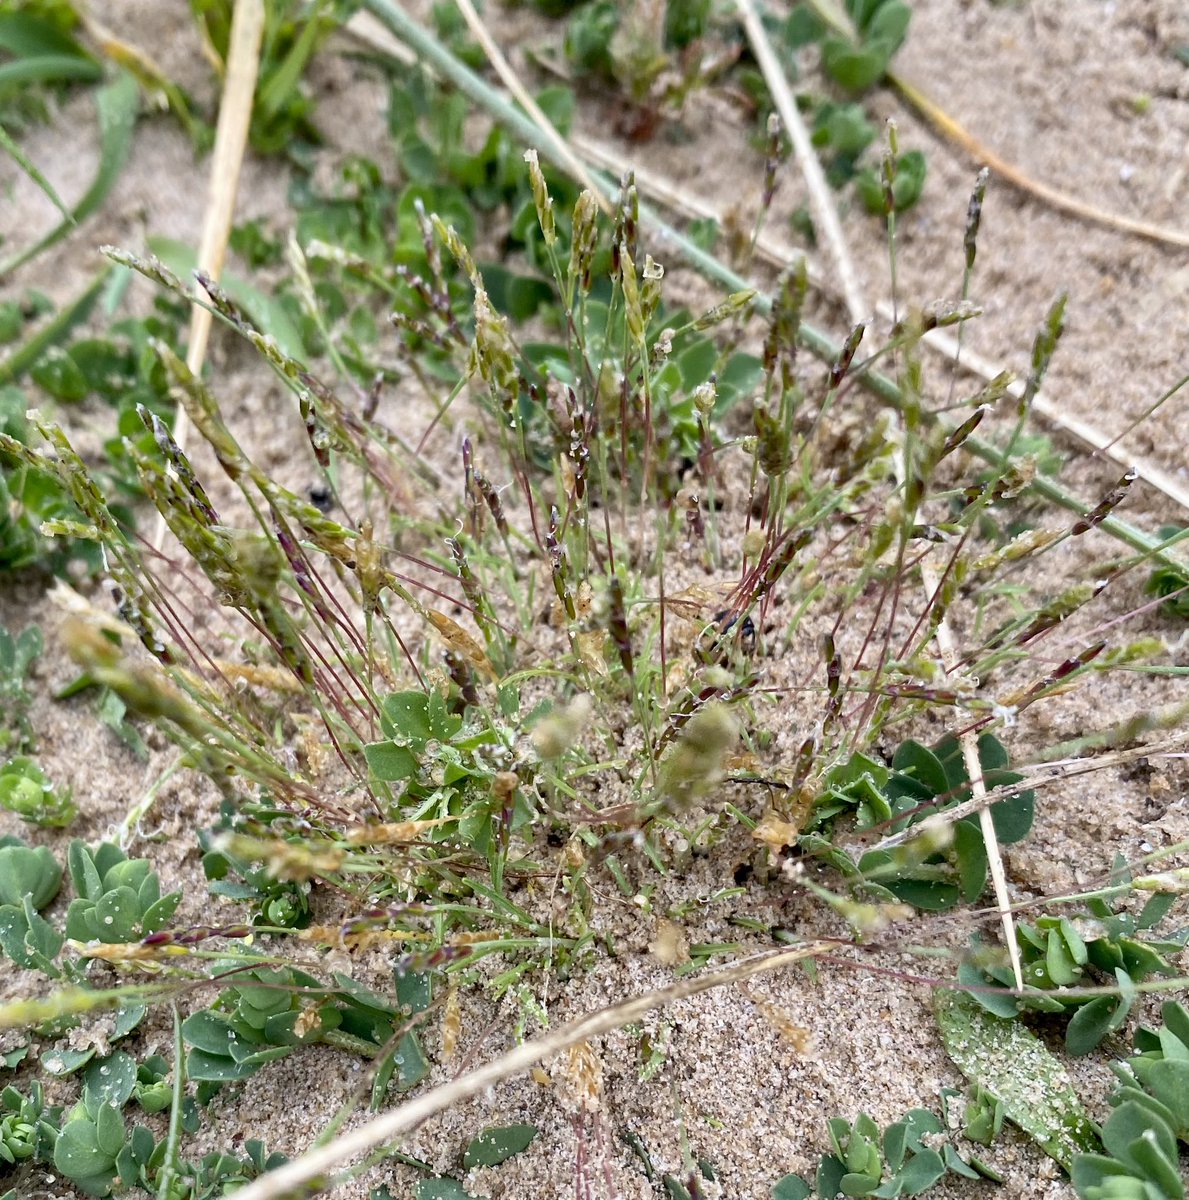 Gales & driving rain tested the resolve of Conservation & Land Management MSc students at Aberffraw this afternoon. They’re made of tough stuff! We reached the foredunes and found Early-sand Grass (Mibora minima), the world’s smallest grass @BangorApis @BangorUni @BSBIbotany